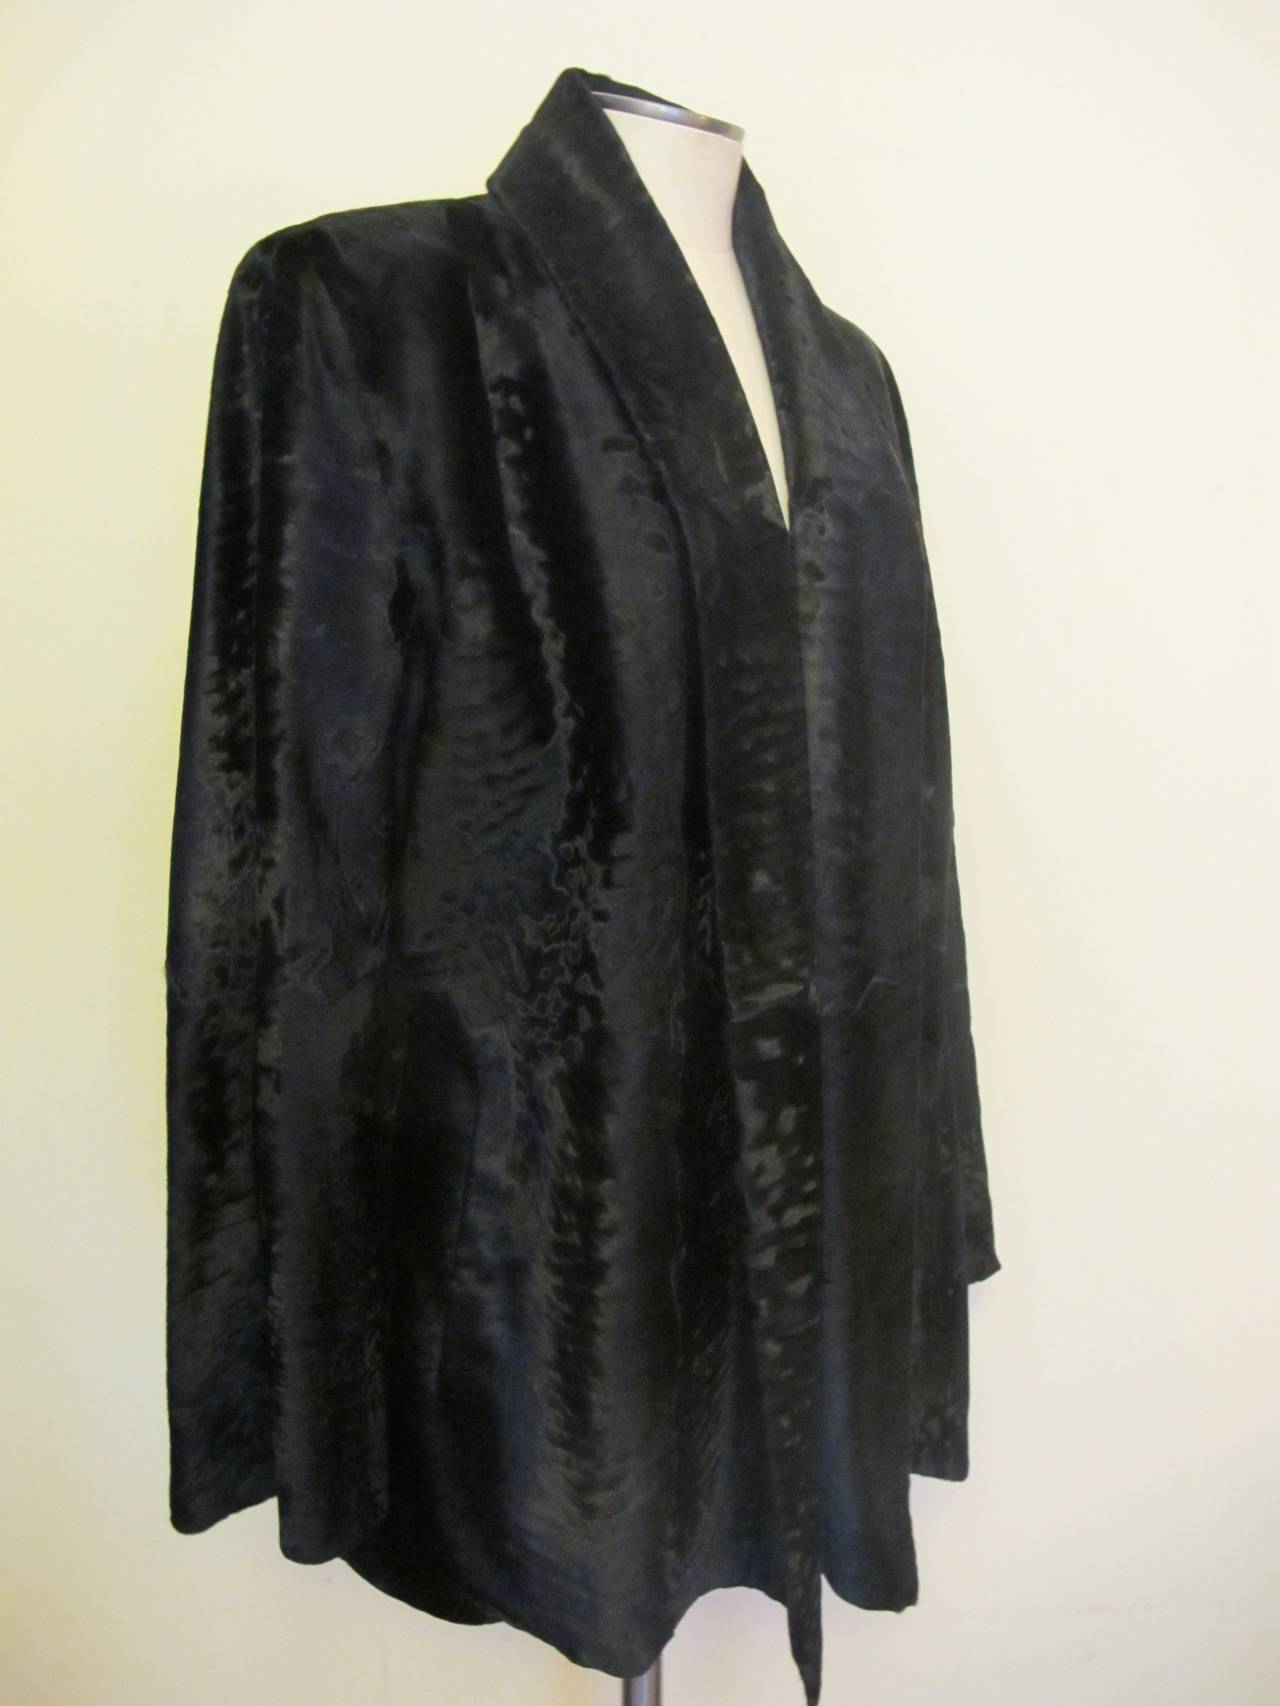 Giuliana Teso Black Broadtail Jacket for Neiman Marcus For Sale 1